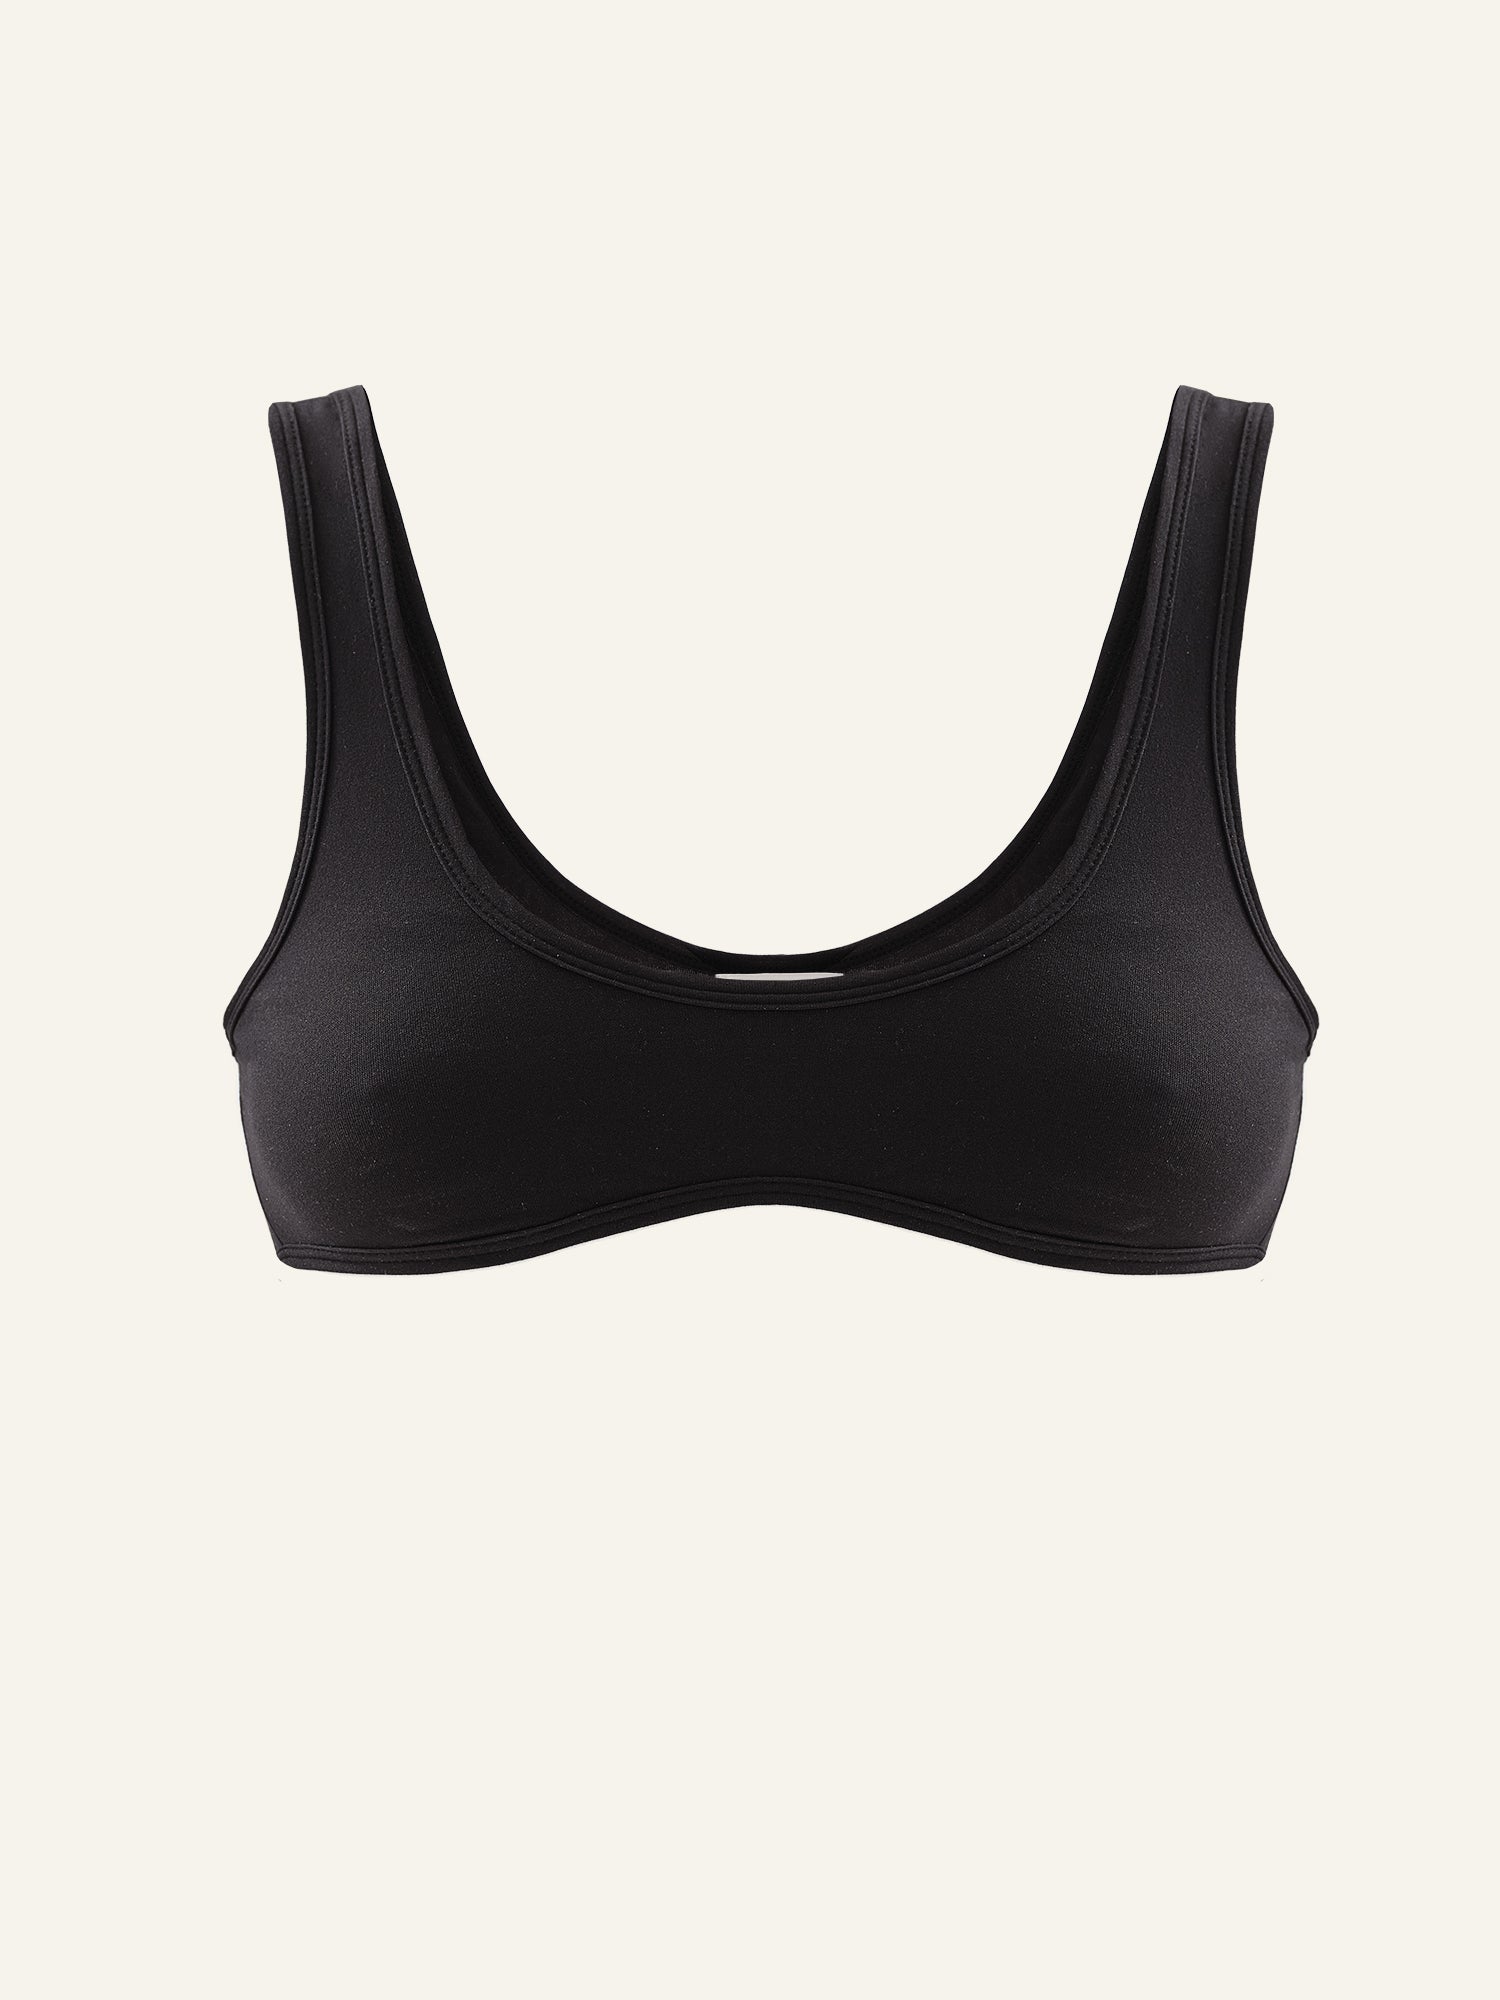 Product photo of a black regenerated nylon crop top